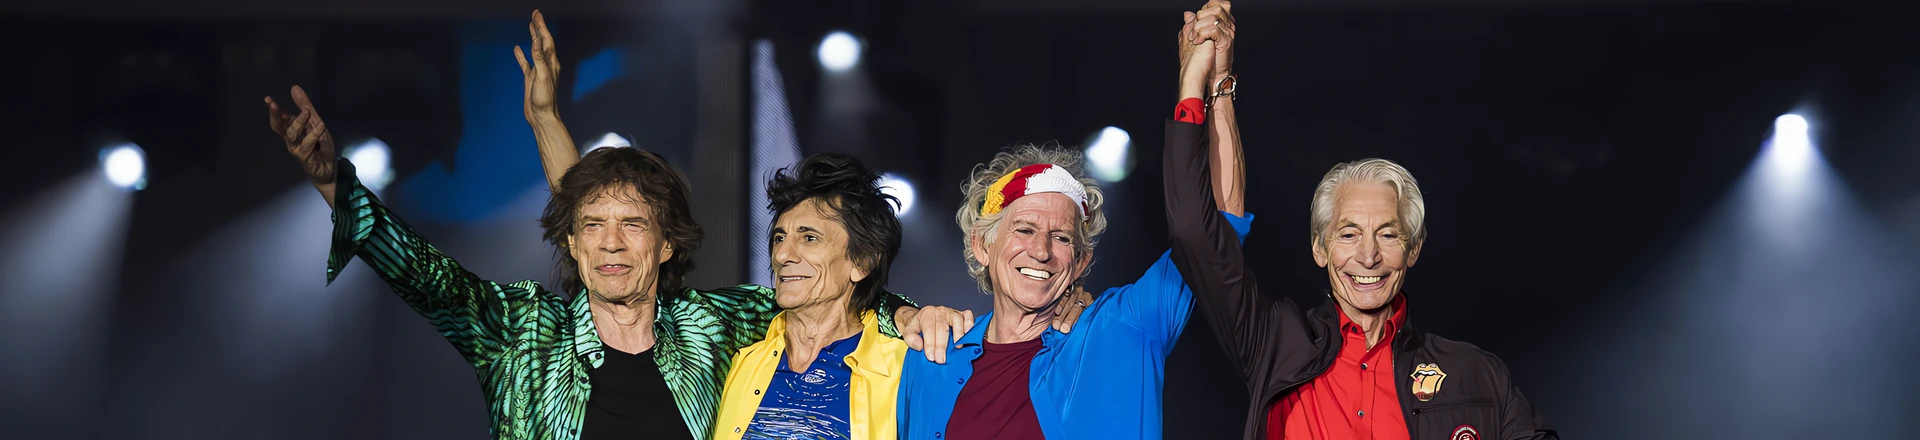 Nowy utwór The Rolling Stones - "Living in a Ghost Town"